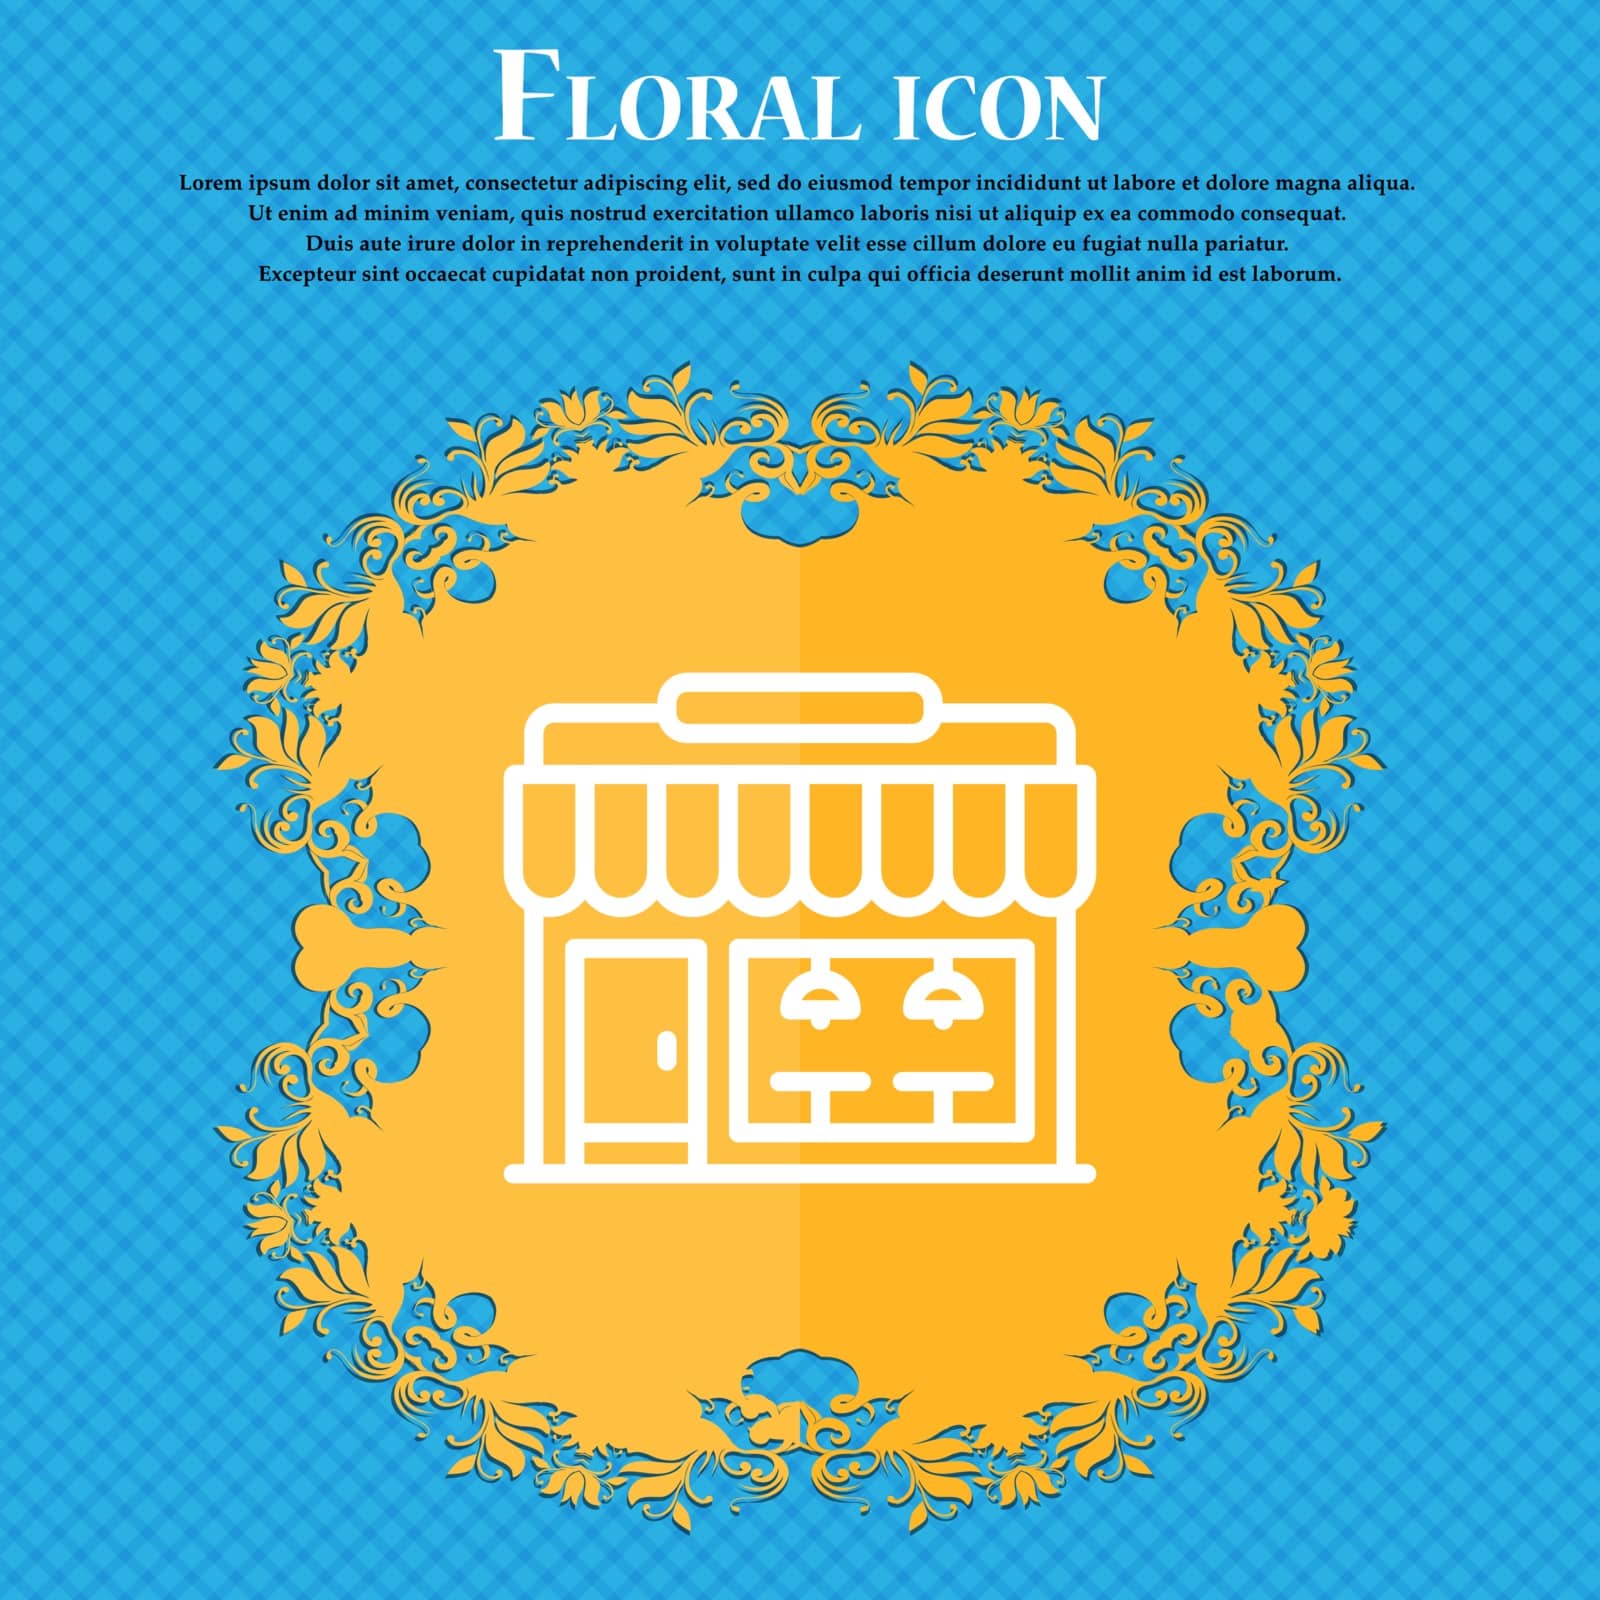 Store icon sign. Floral flat design on a blue abstract background with place for your text. Vector illustration